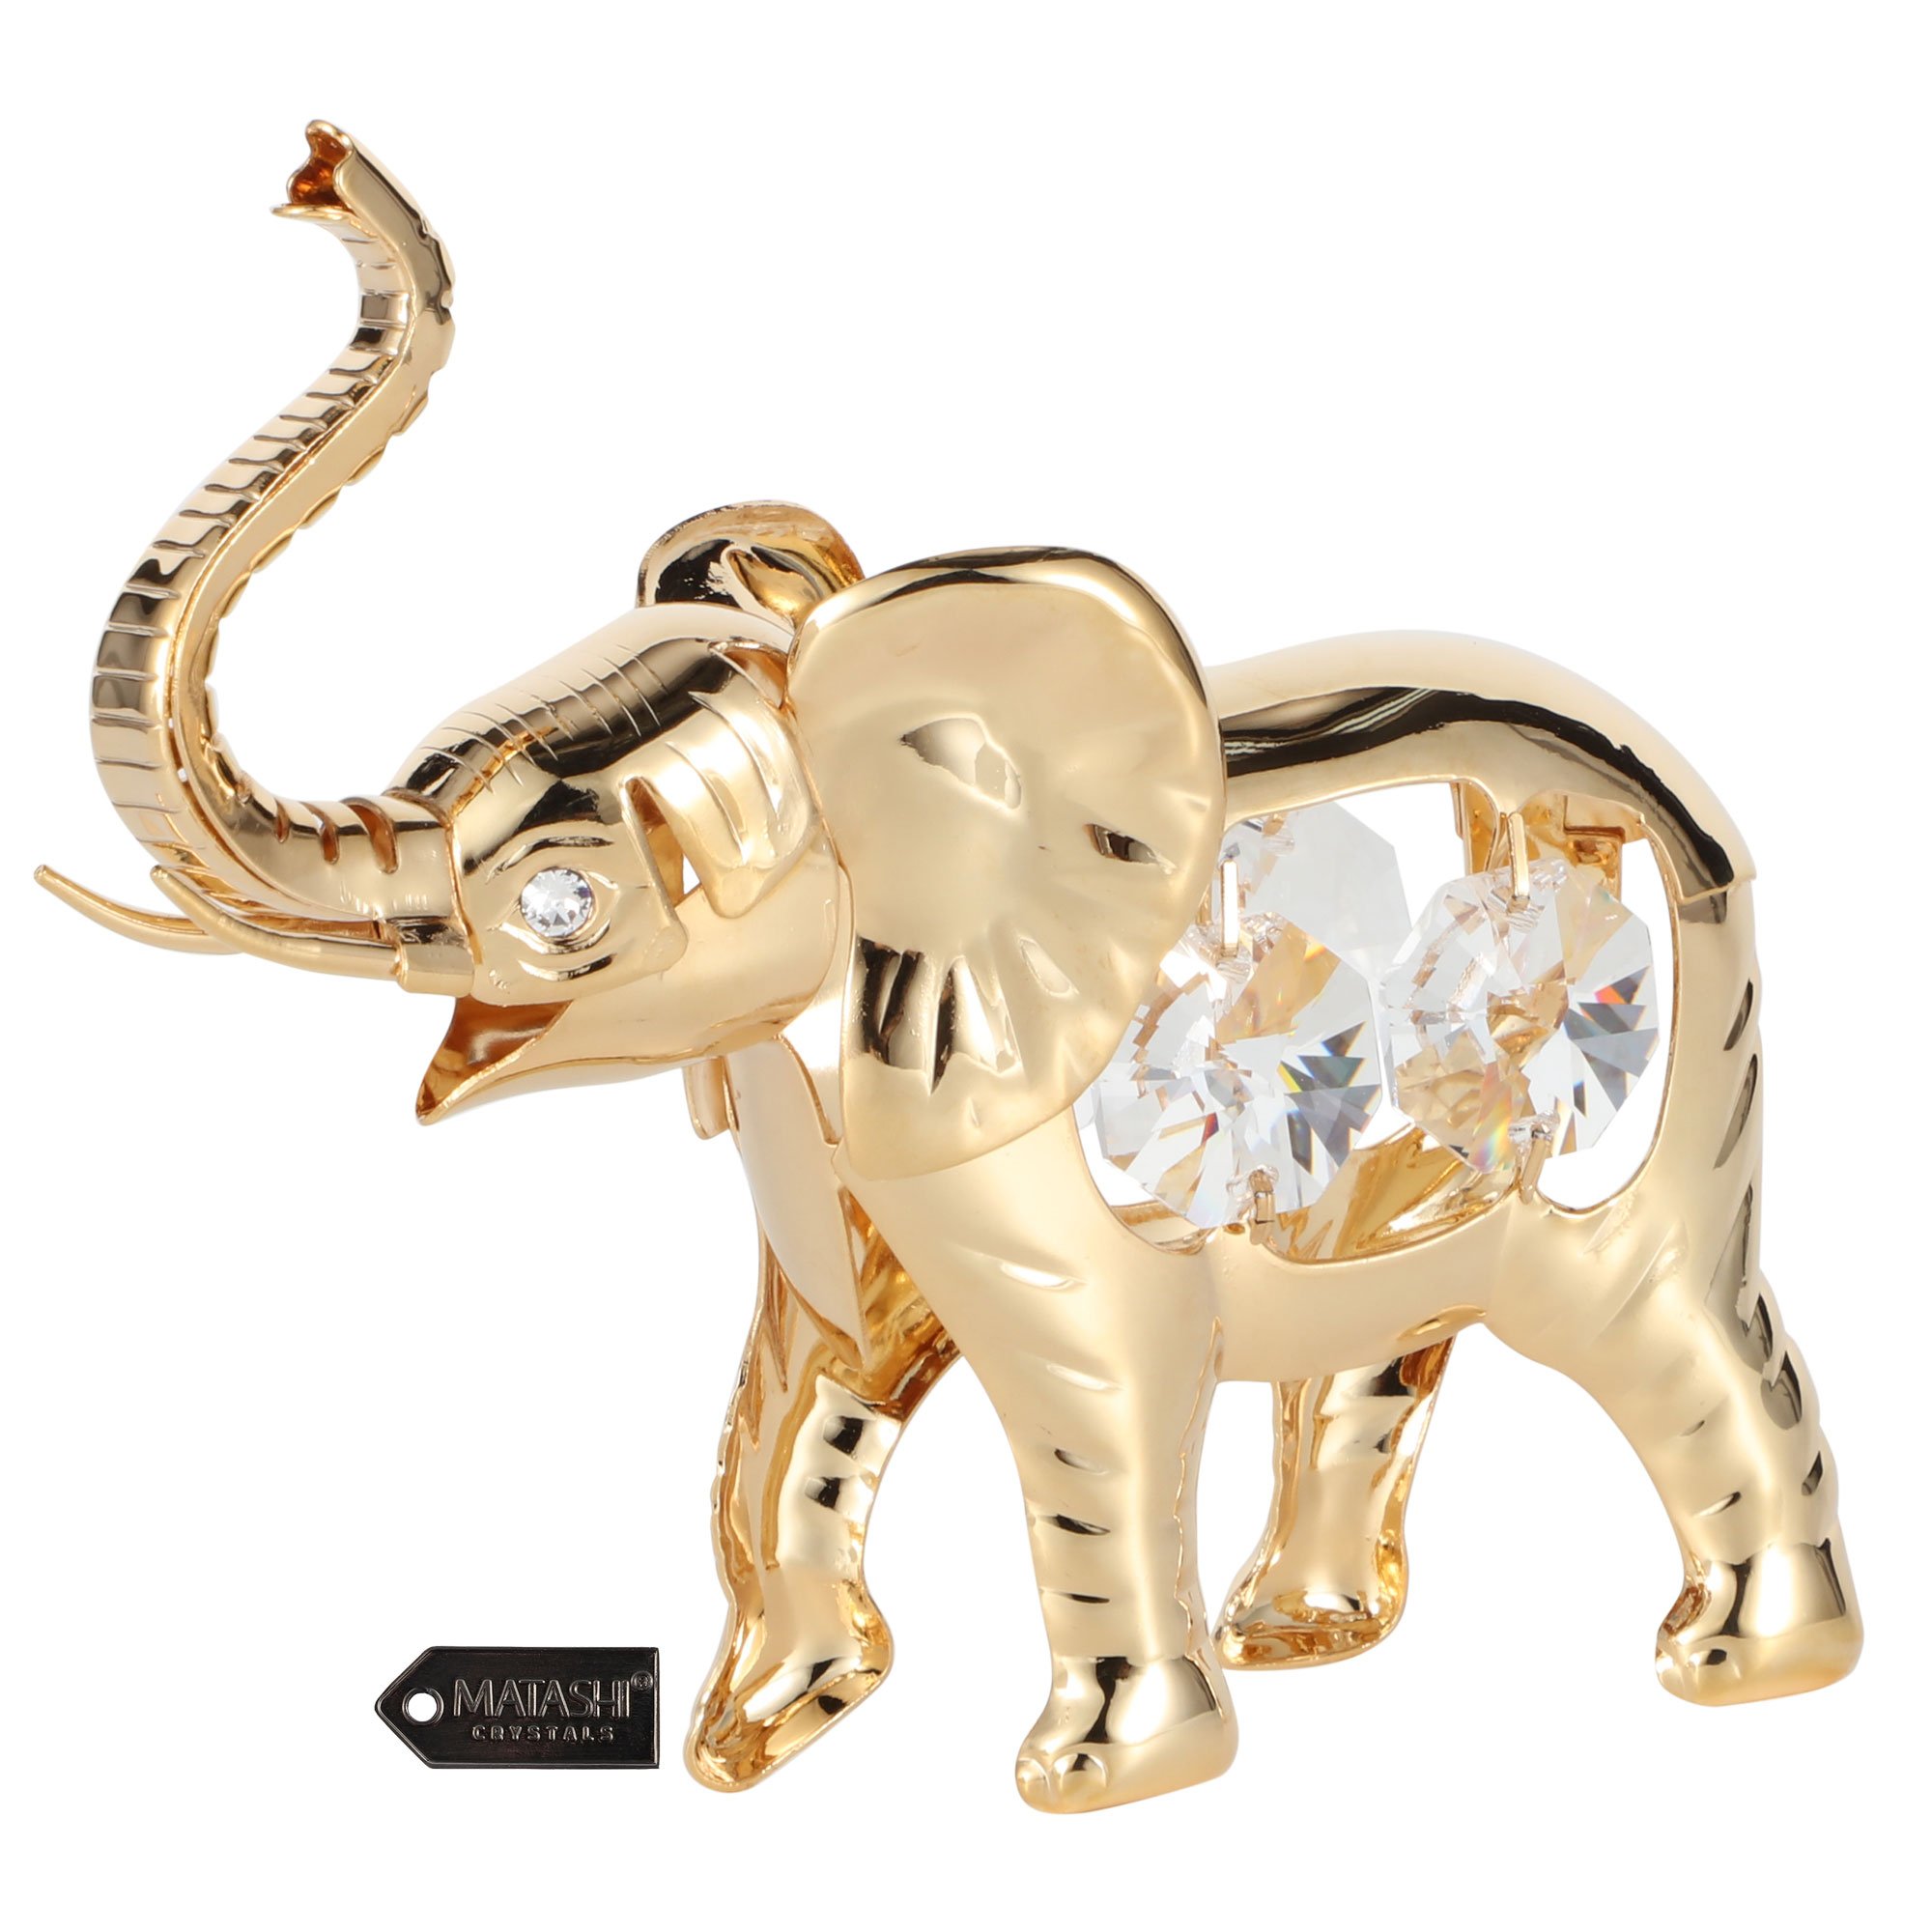 Matashi 24K Gold Plated Crystal Studded Elephant Ornament Tabletop Home Decorative Showpiece Gift For Christmas Mother's Day Valentine's Day